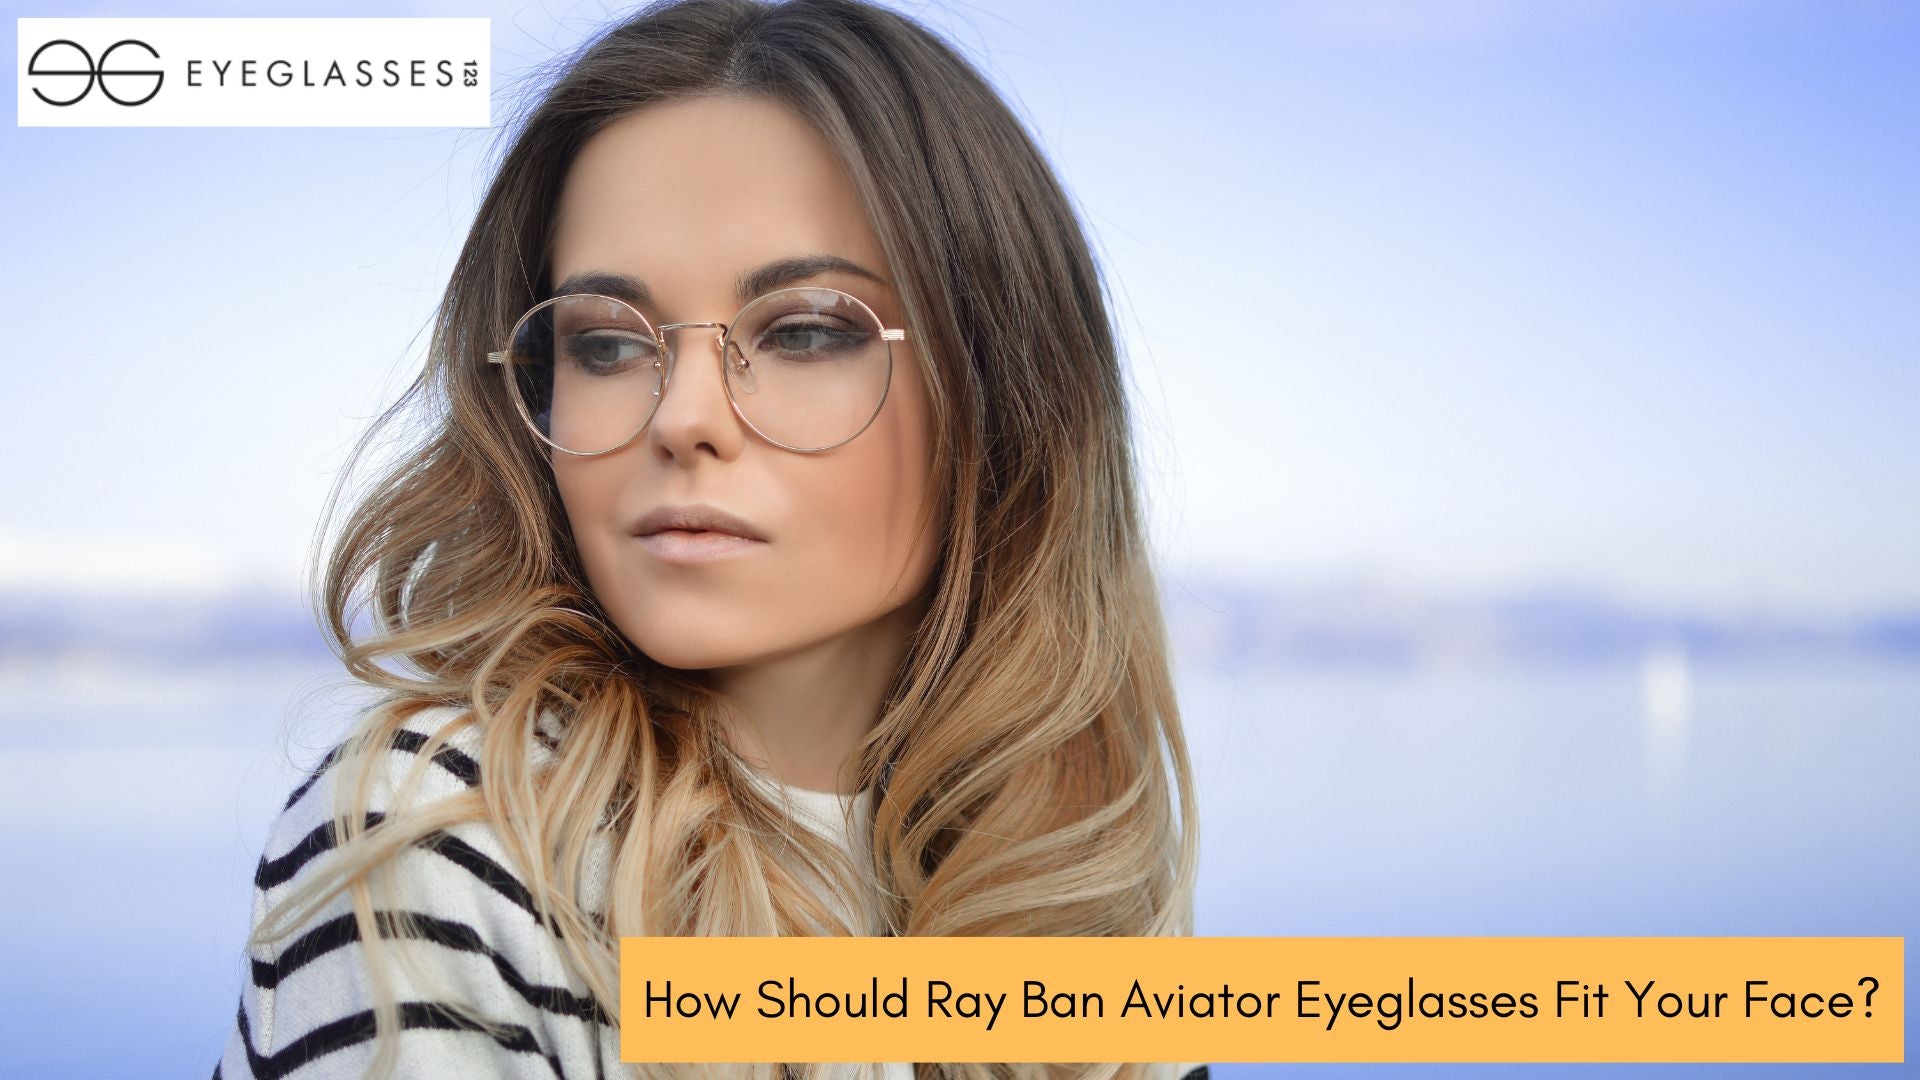 How Should Ray Ban Aviator Eyeglasses Fit Your Face?